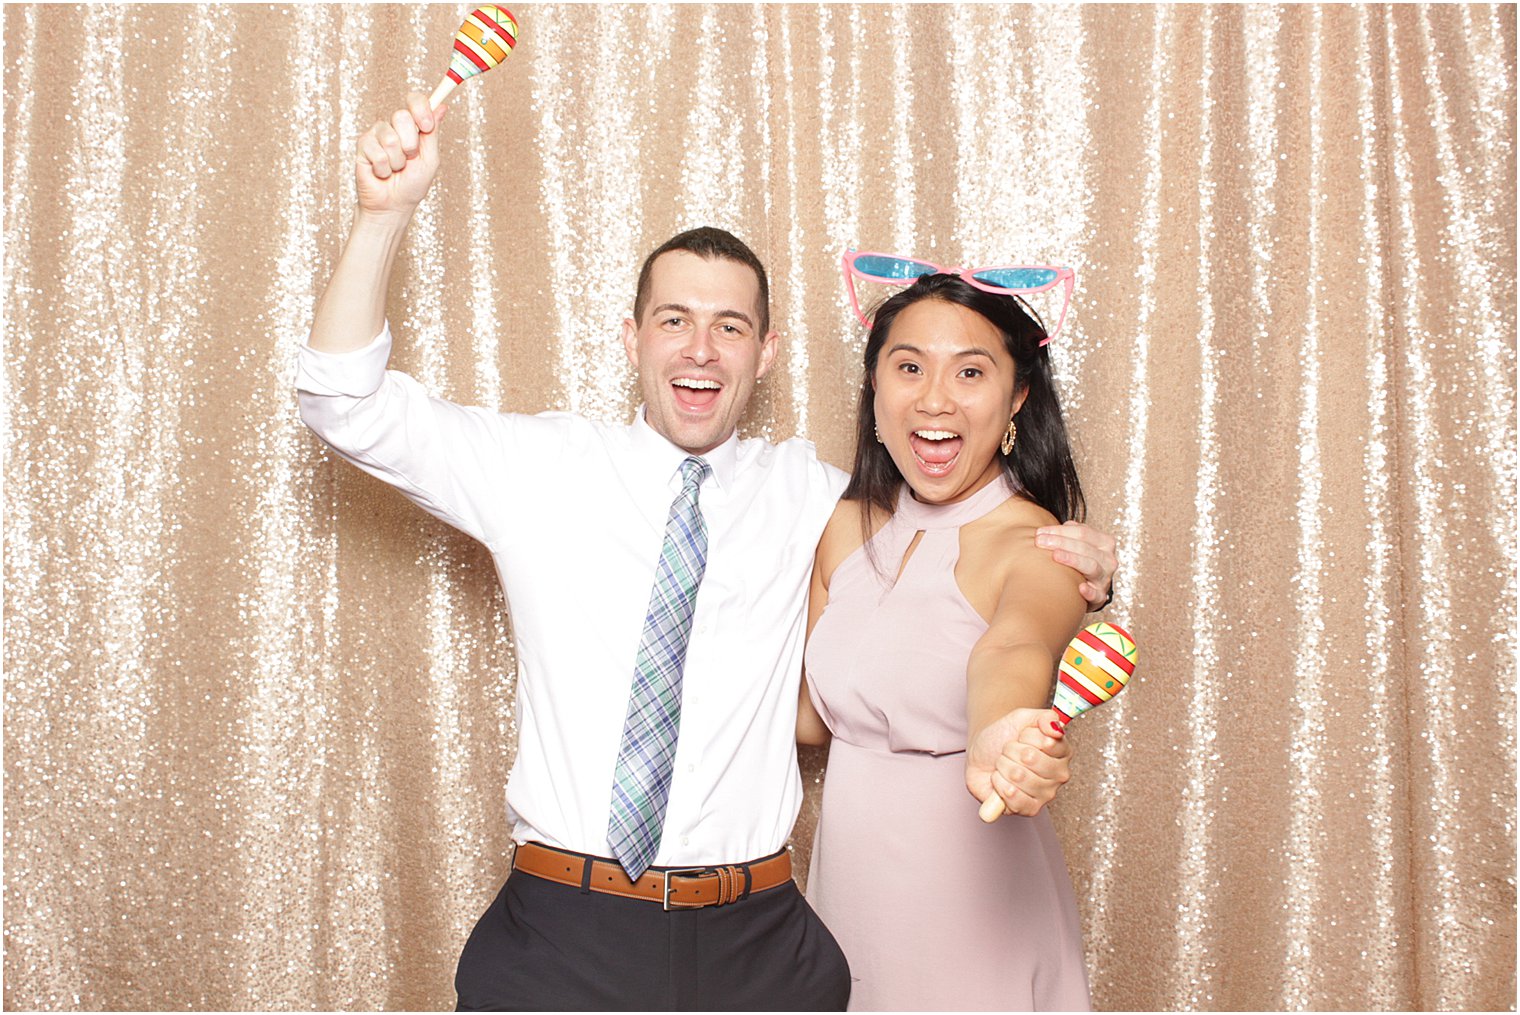 wedding guests dance during photo booth at Lake Mohawk Country Club